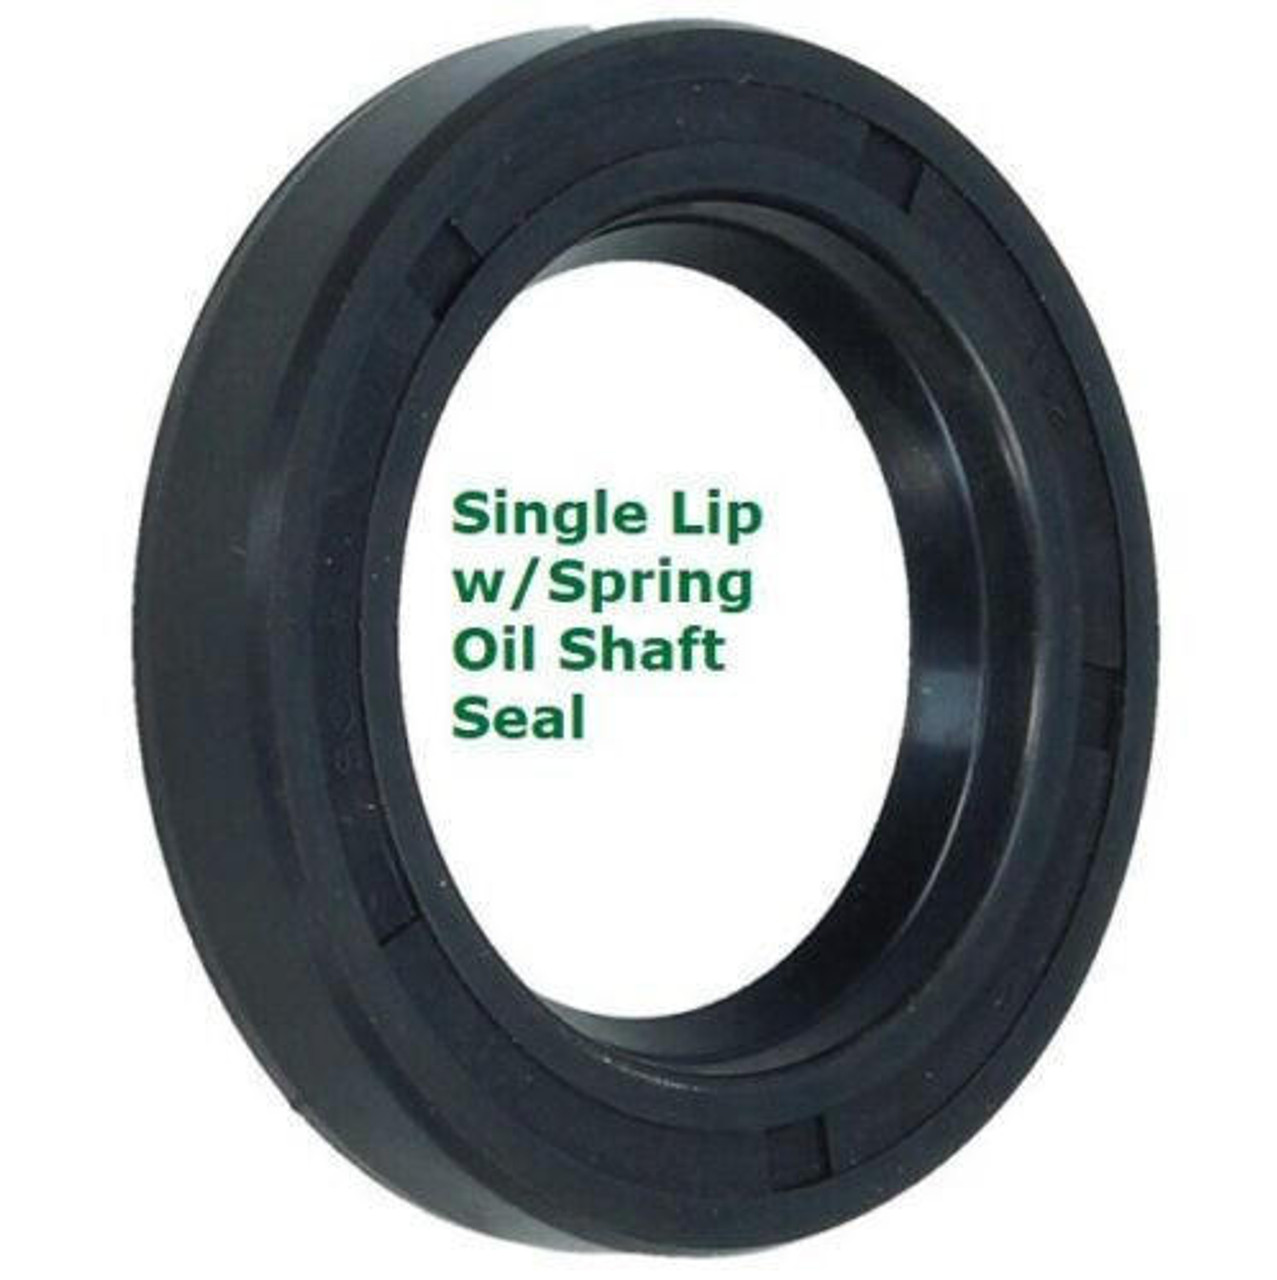 Metric Oil Shaft Seal 105 x 130 x 13mm   Price for 1 pc